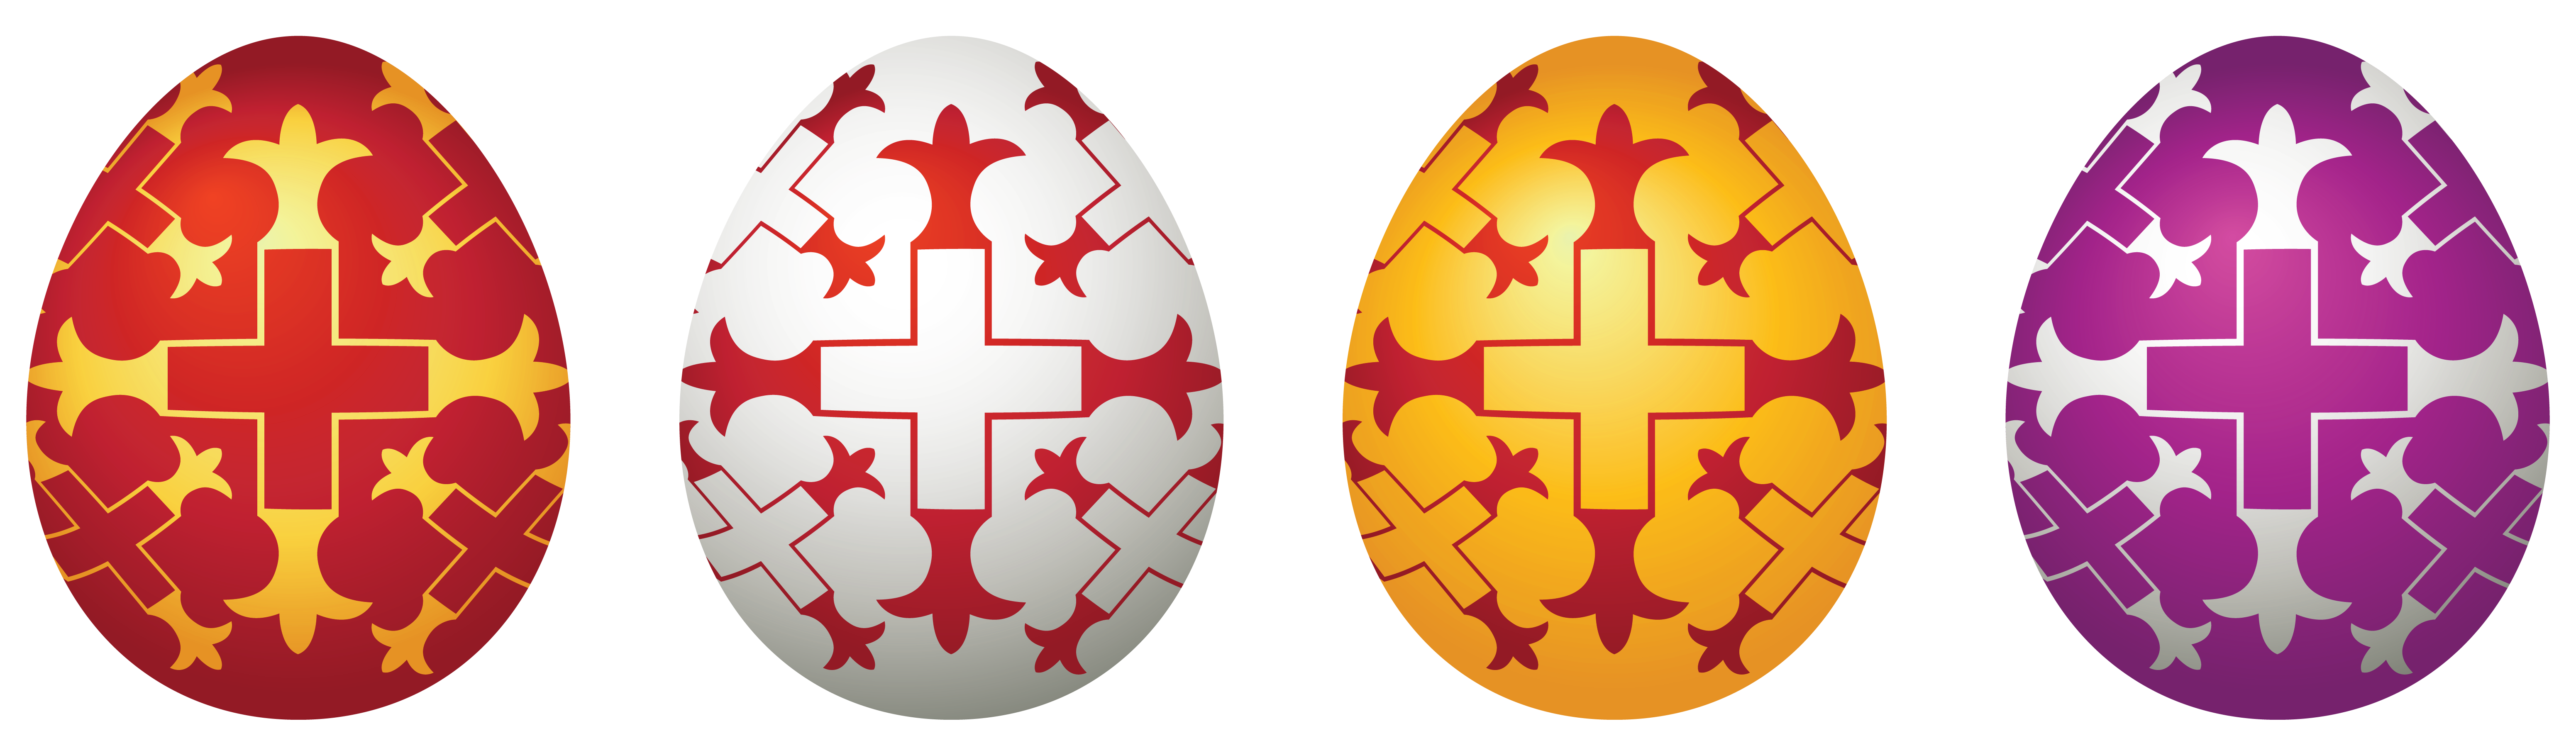 free clipart easter symbols - photo #9